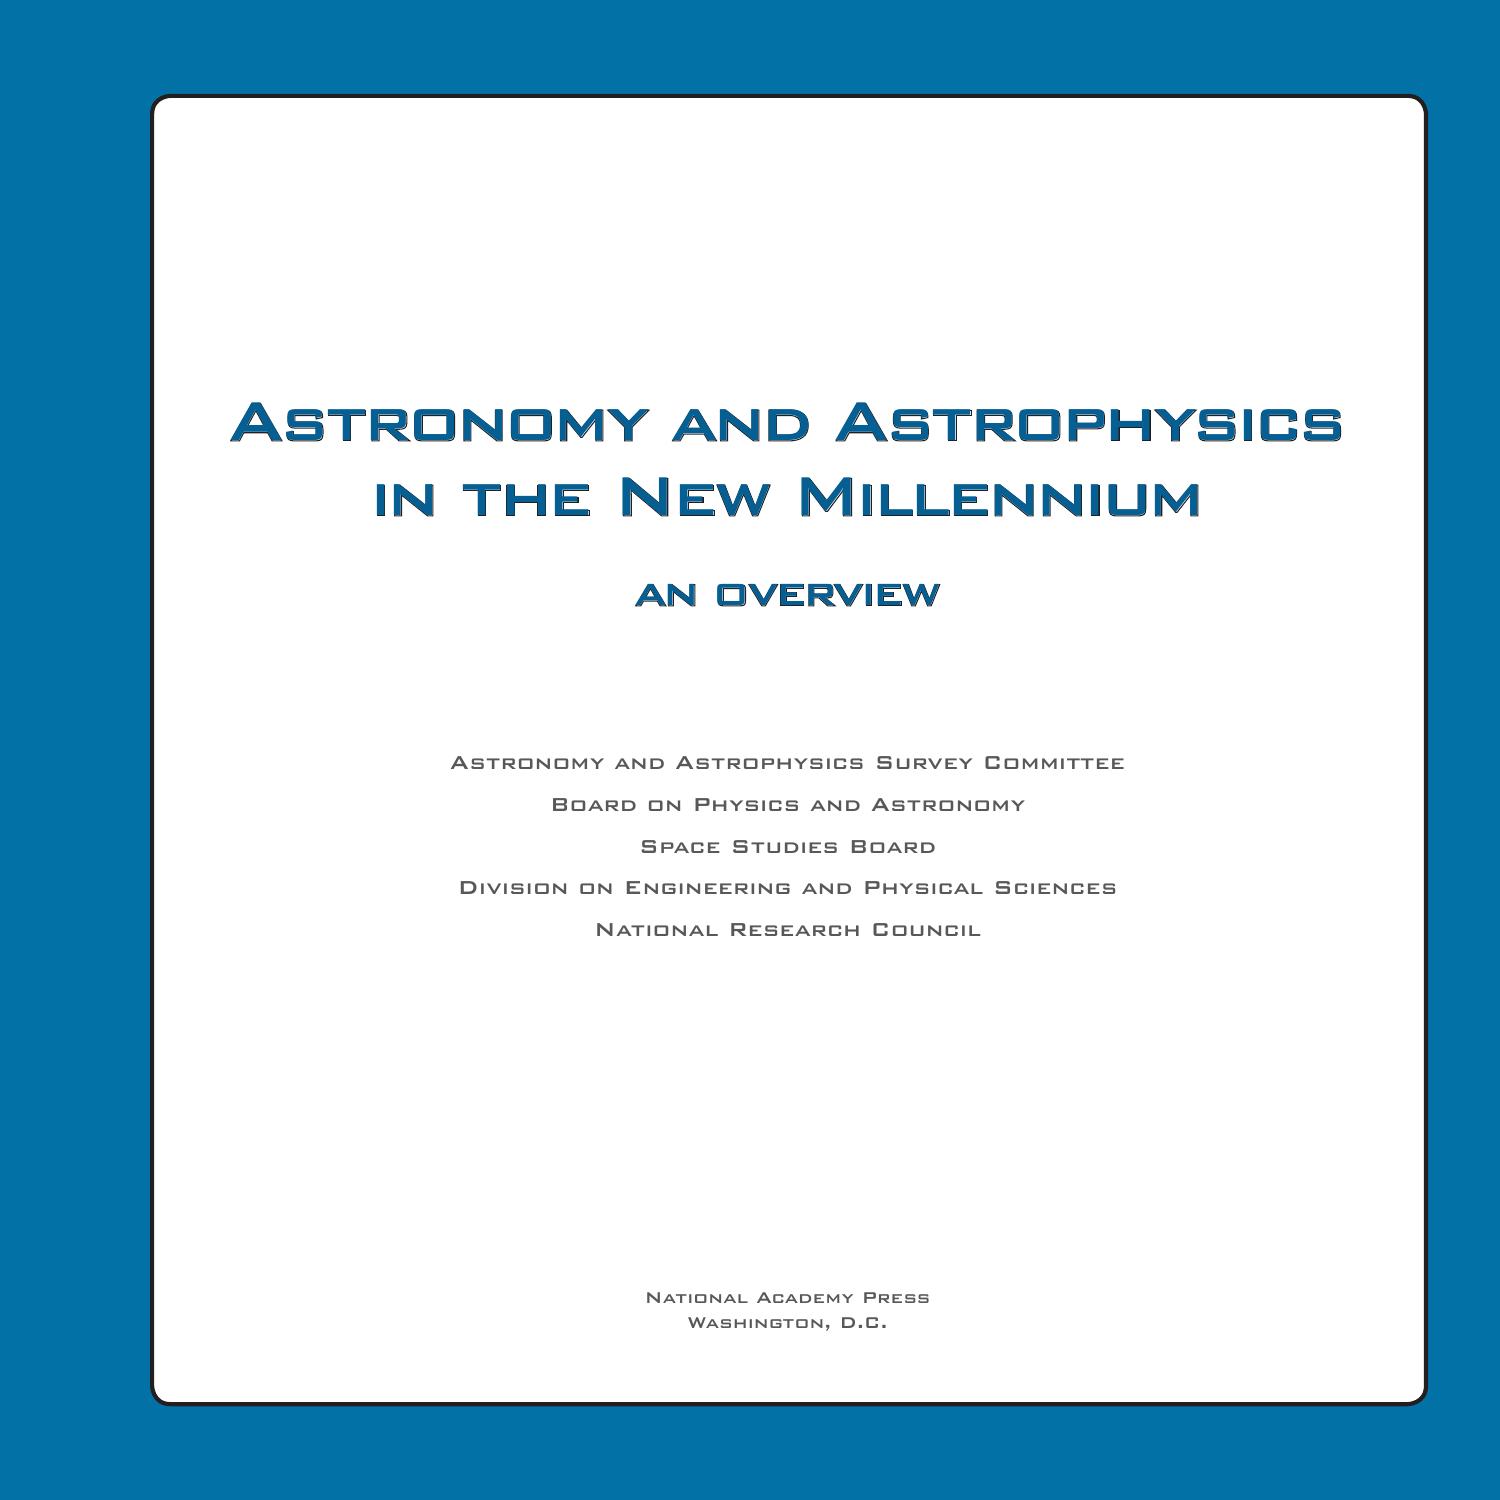 Astronomy and Astrophysics in the New Millennium: An Overview